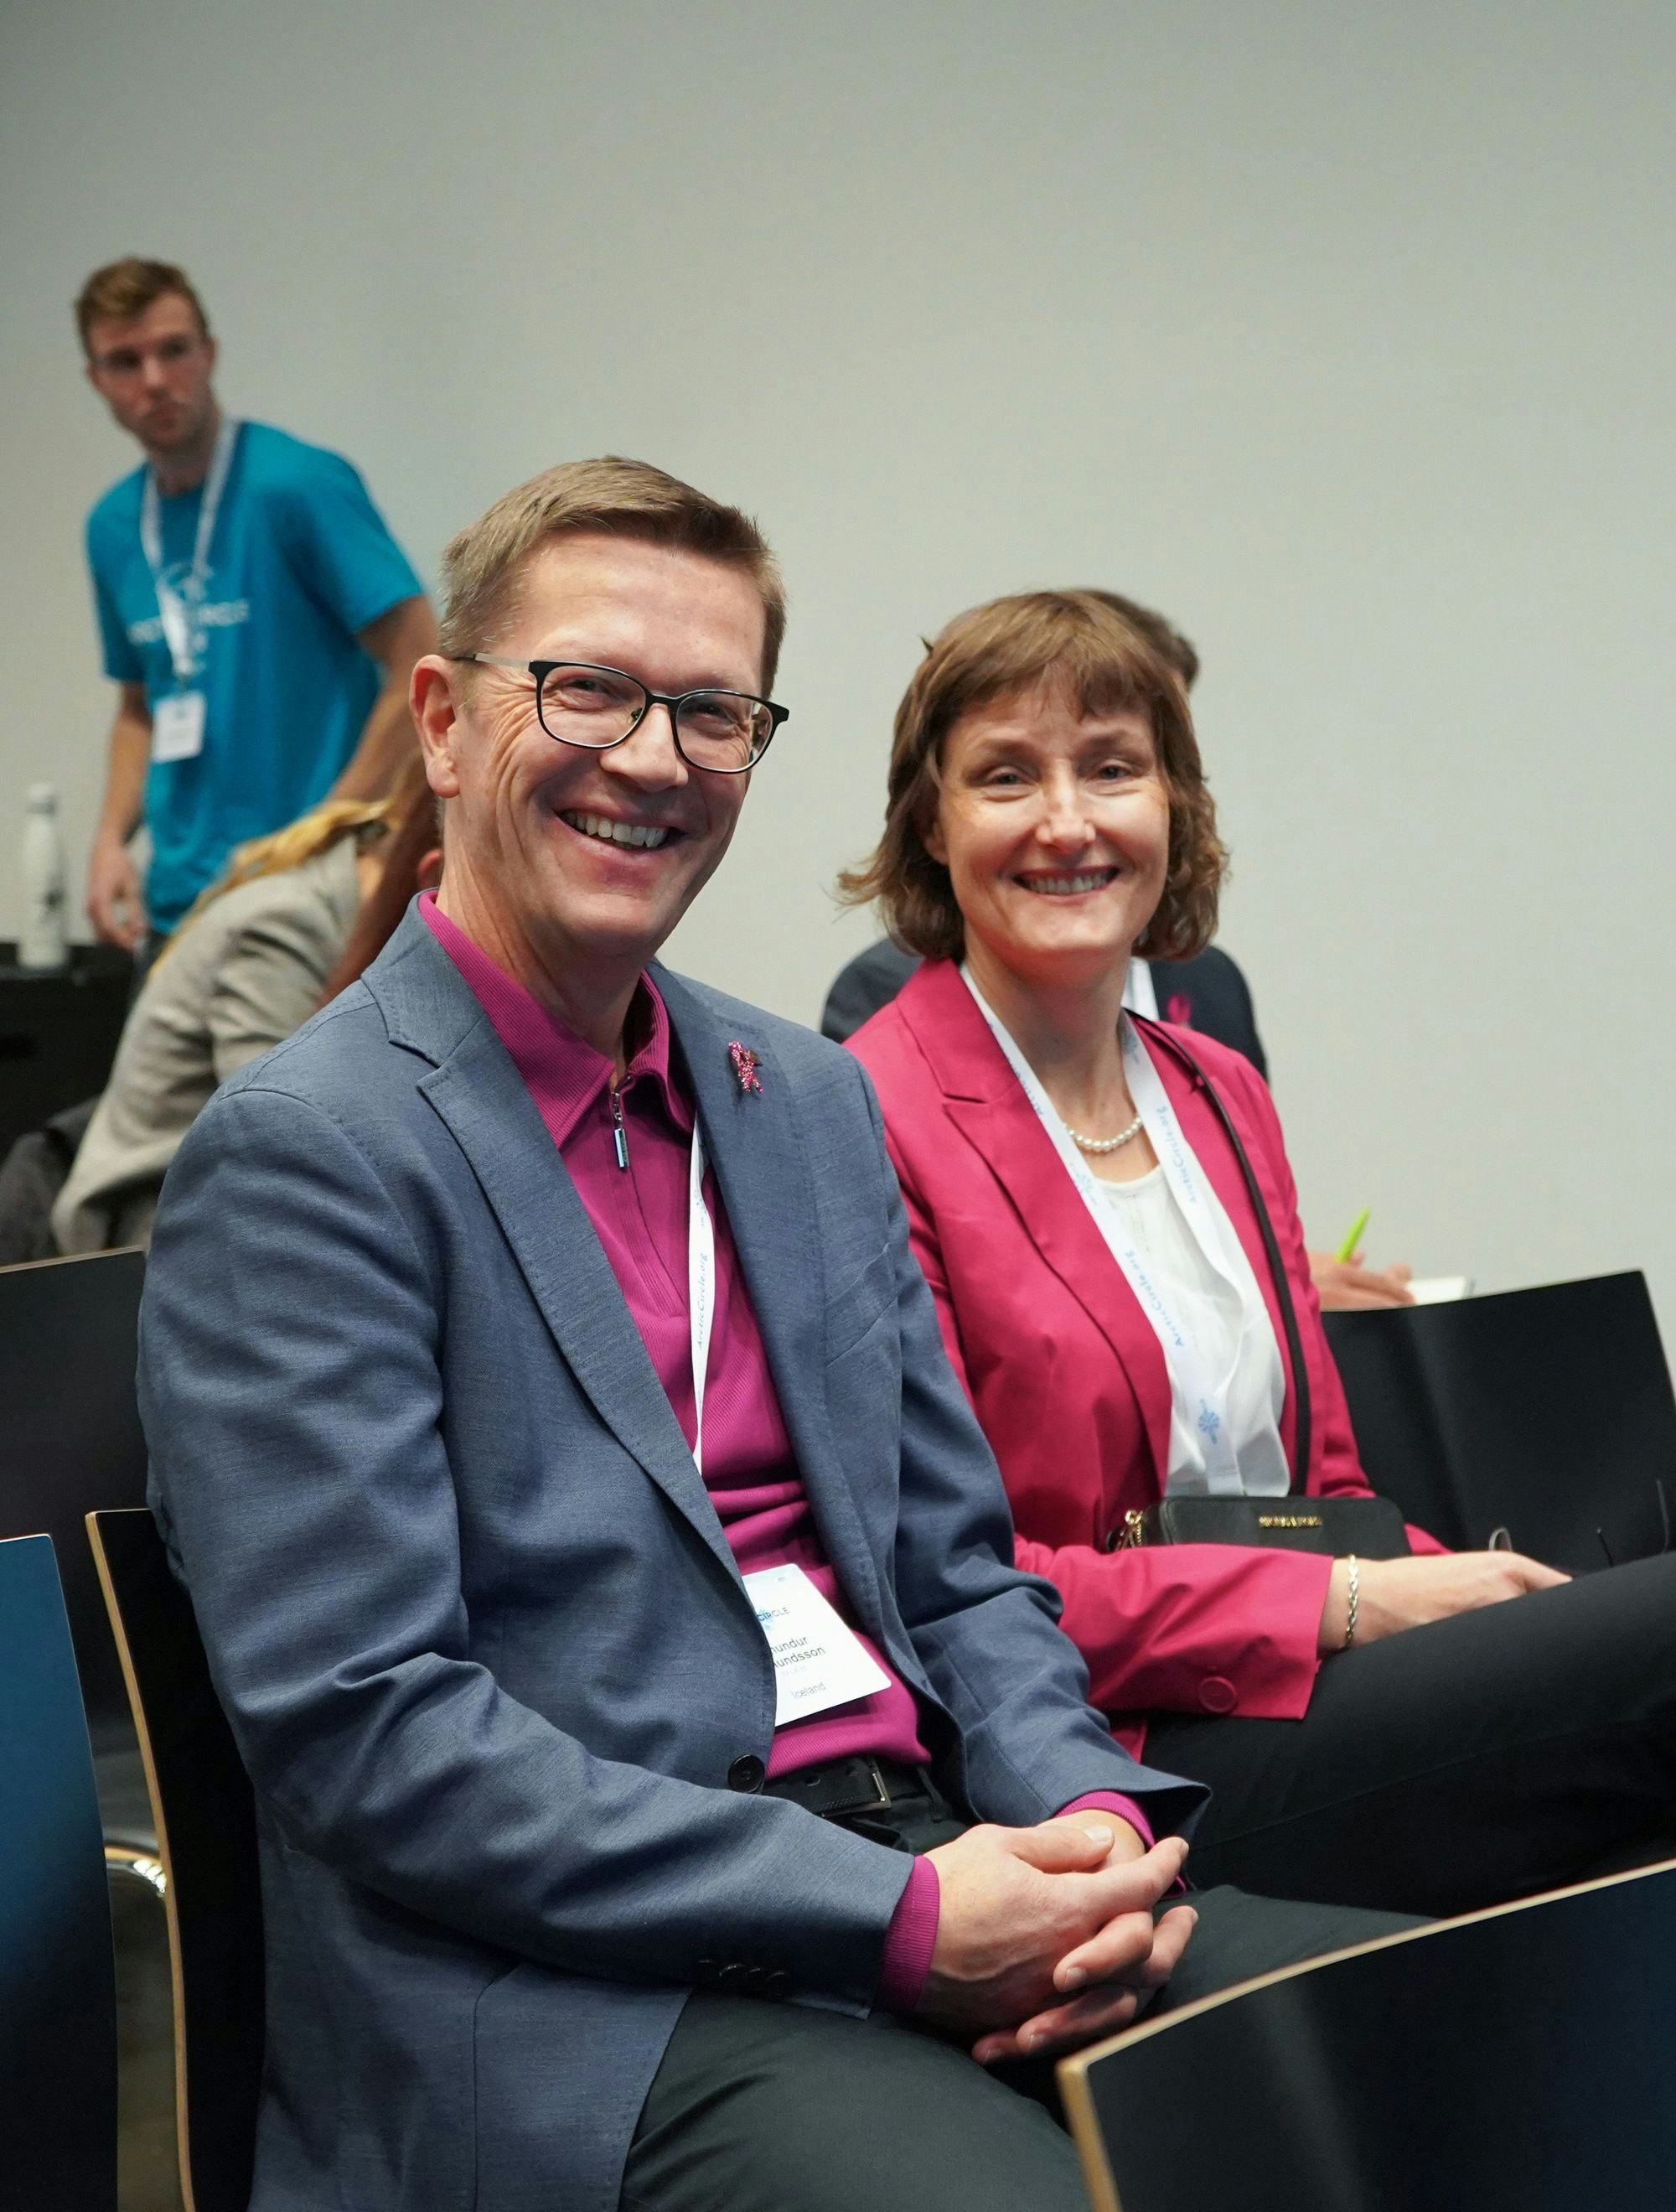 A man and a woman smiling and sitting together, both wearing pink with conference badges